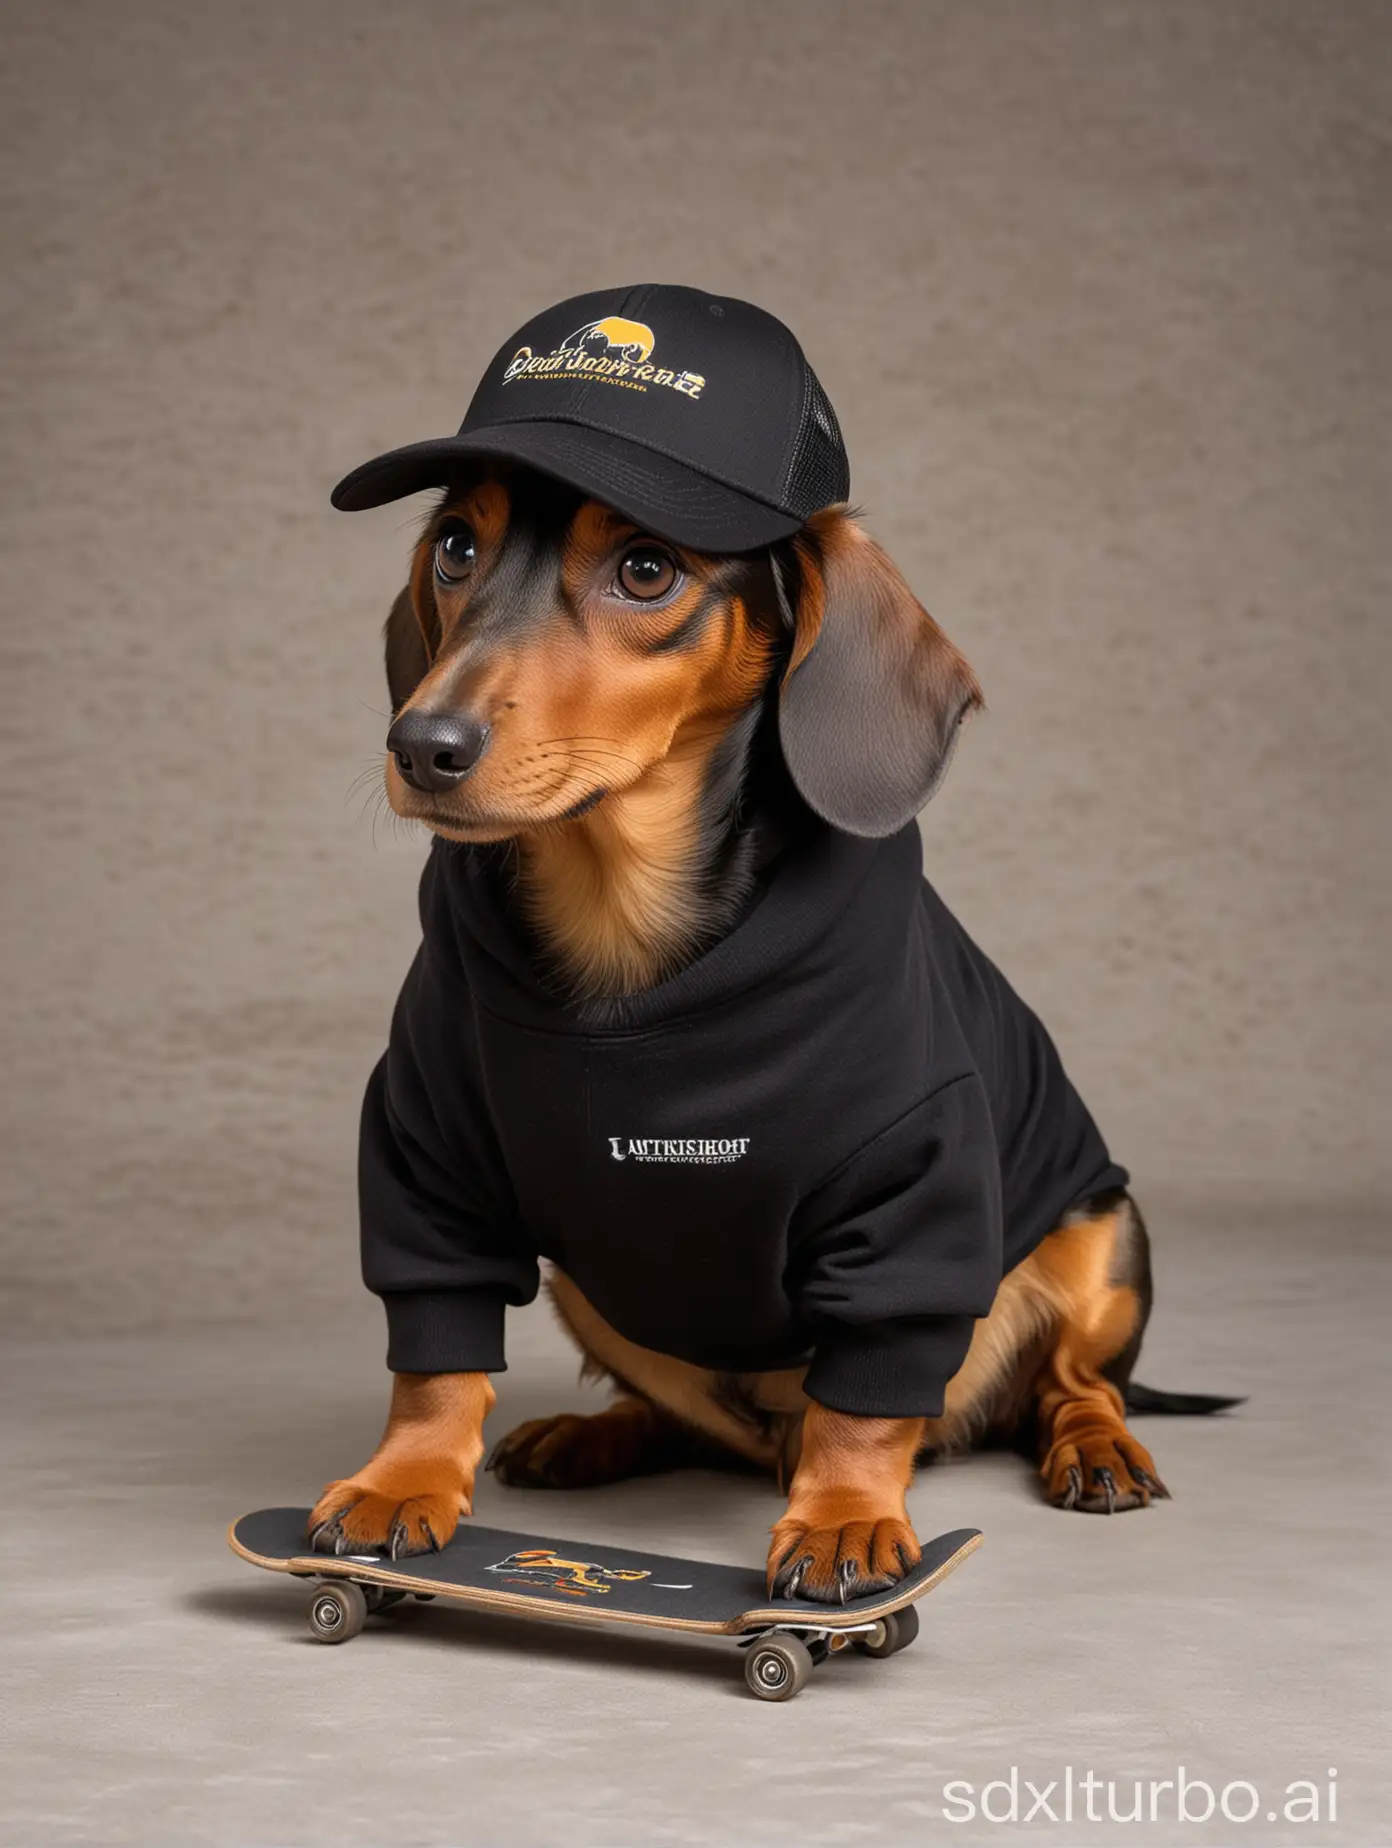 Dachshund dog with a trucker cap and with a black sweatshirt with skateboard logo